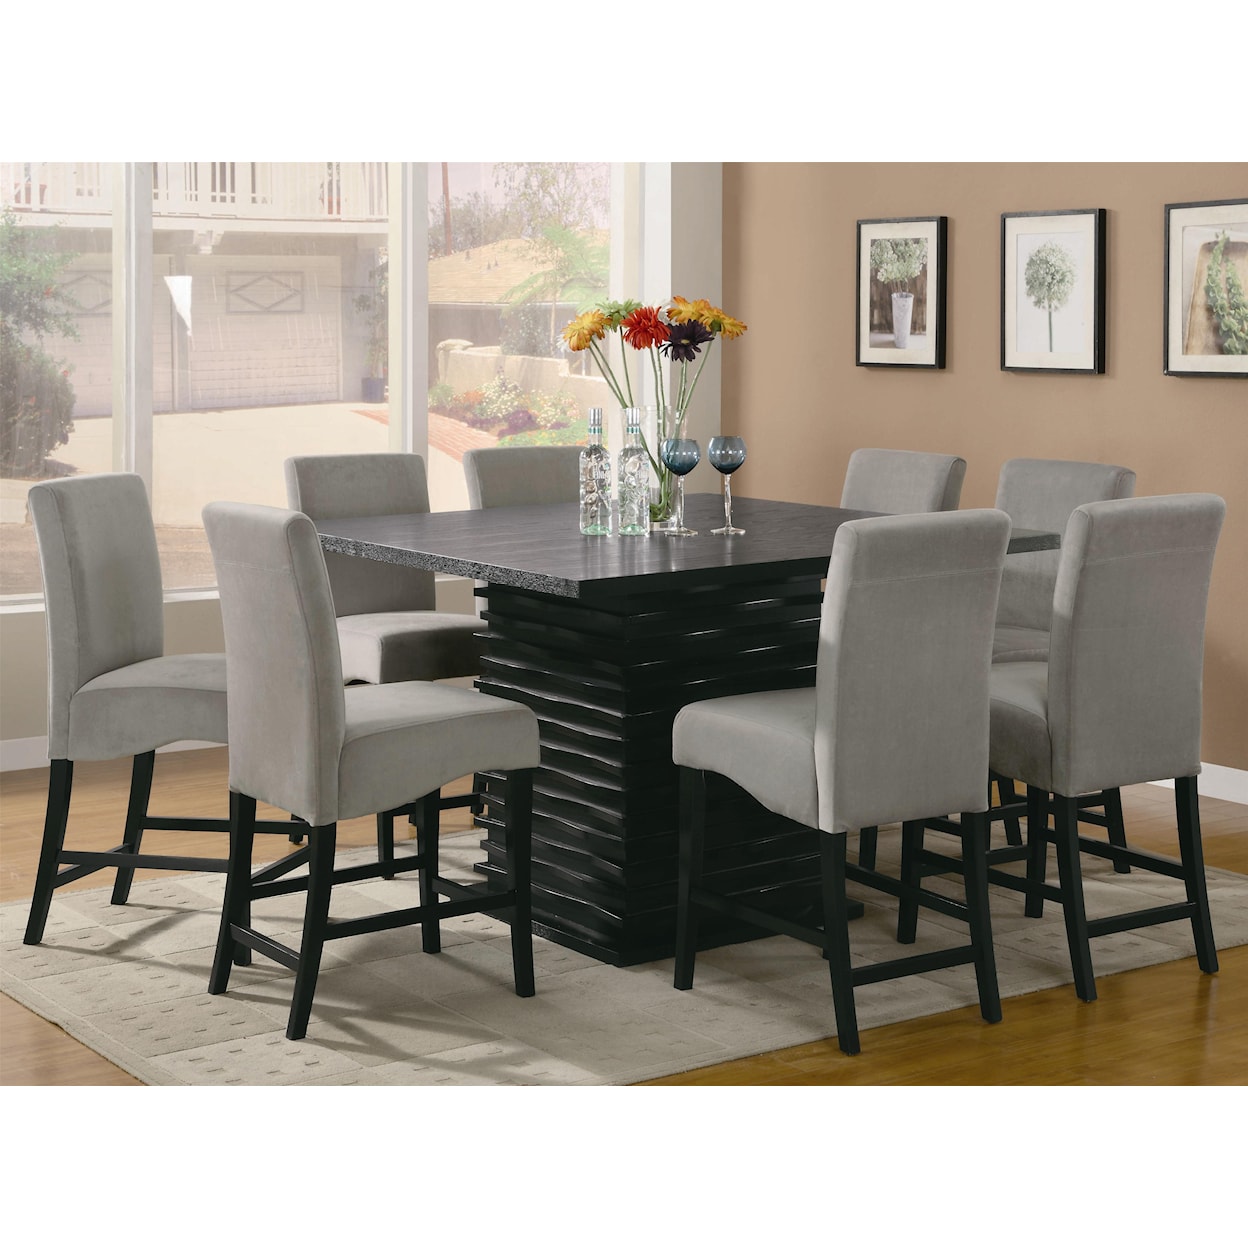 Coaster Stanton  9 Piece Table and Chair Set